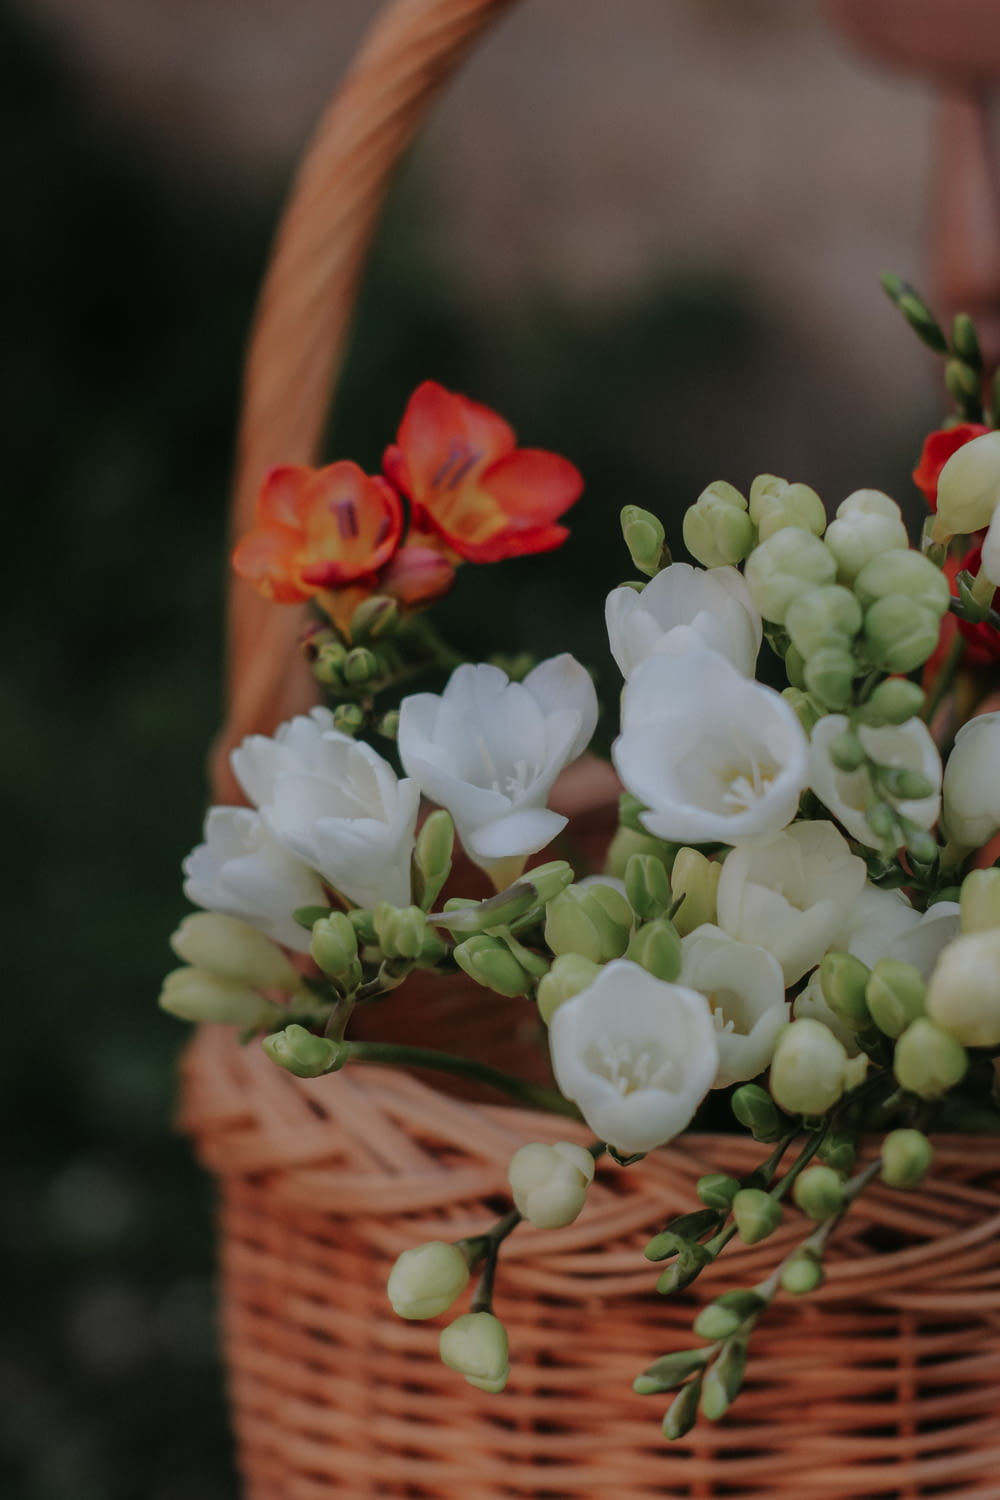 a basket filled with white and red flowers